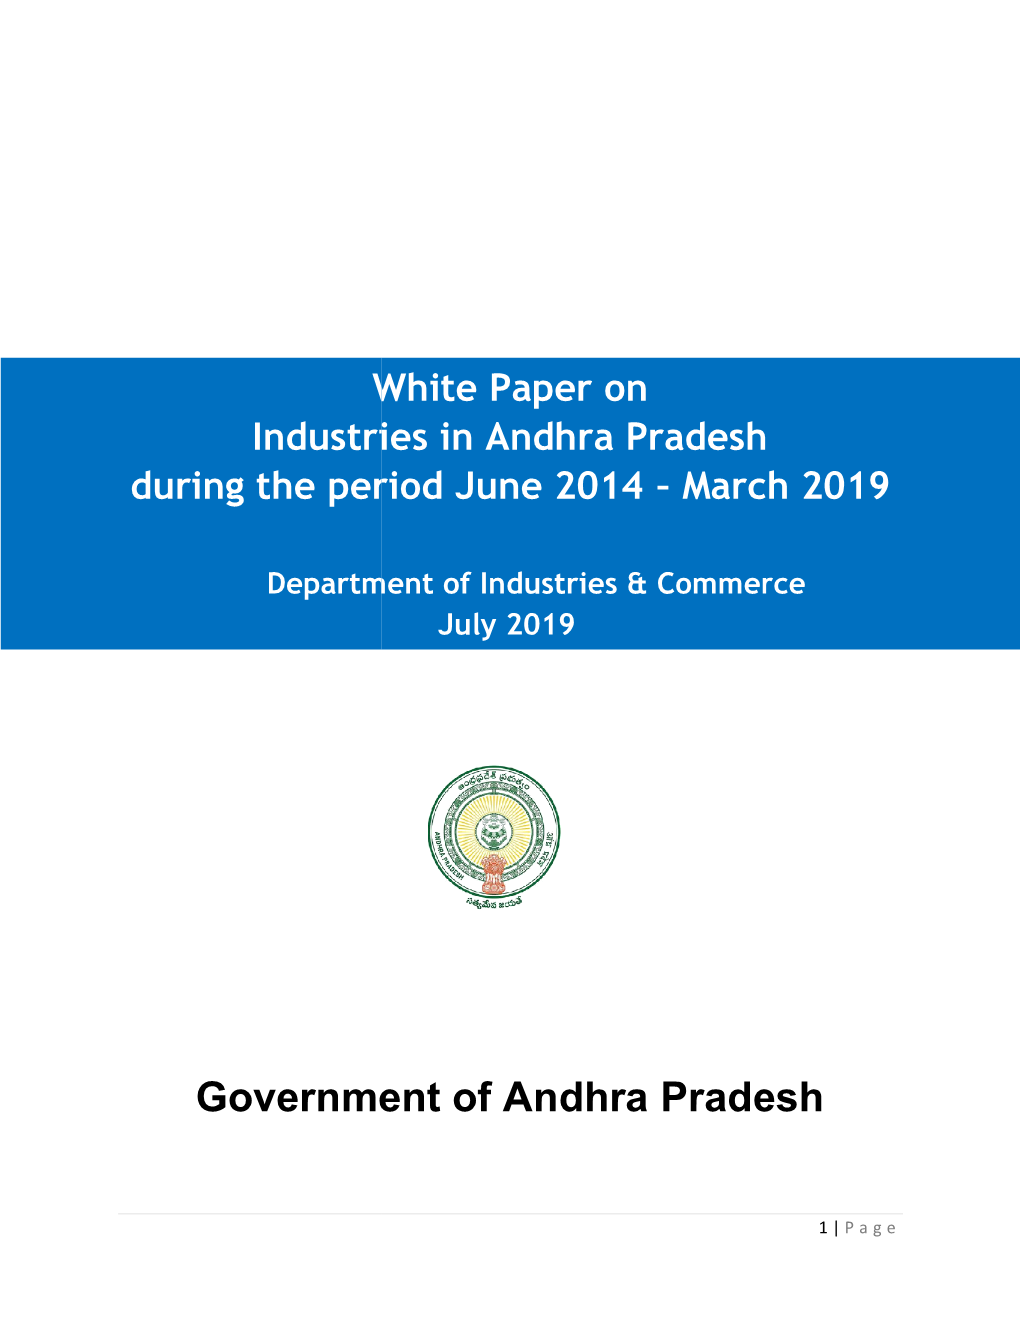 White Paper on Industries in Andhra Pradesh Ing the Period June 2014